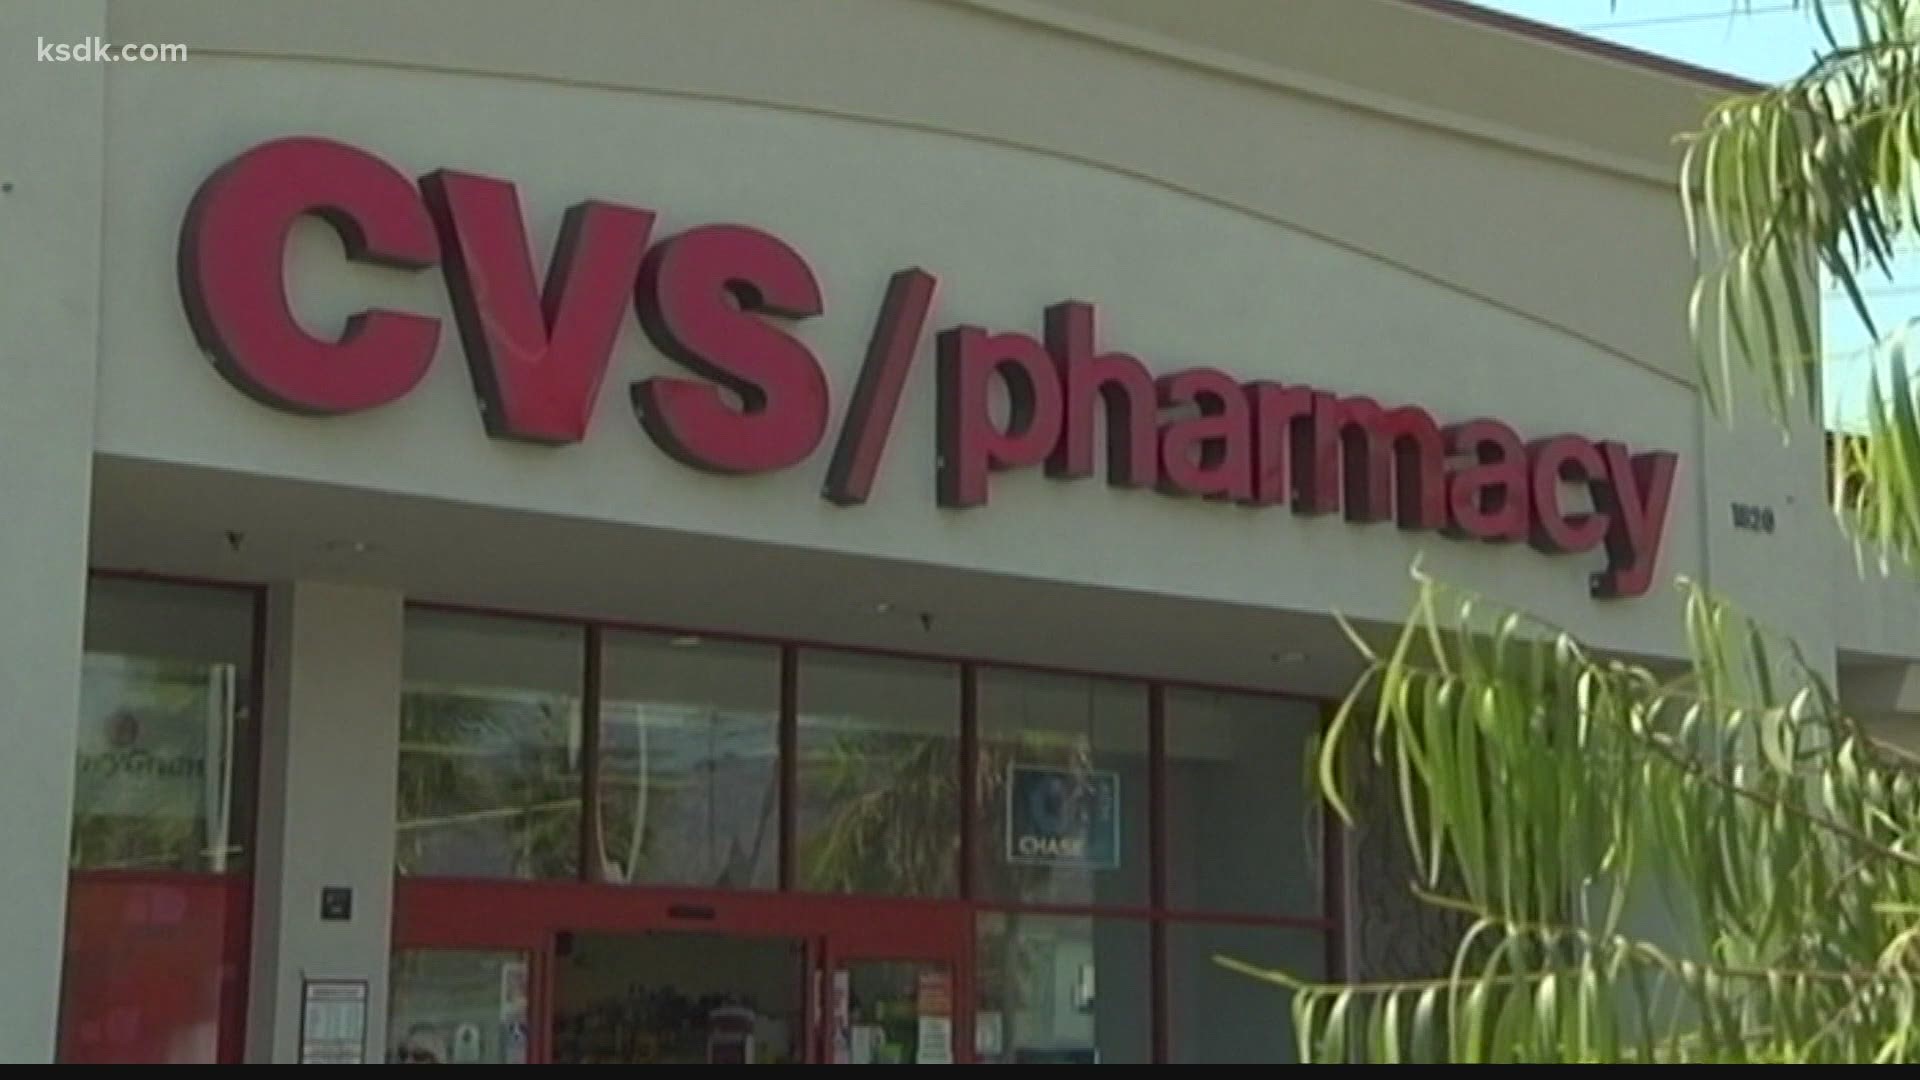 CVS announced on Thursday that vaccines will be available to eligible populations at 12-hundred locations across the country